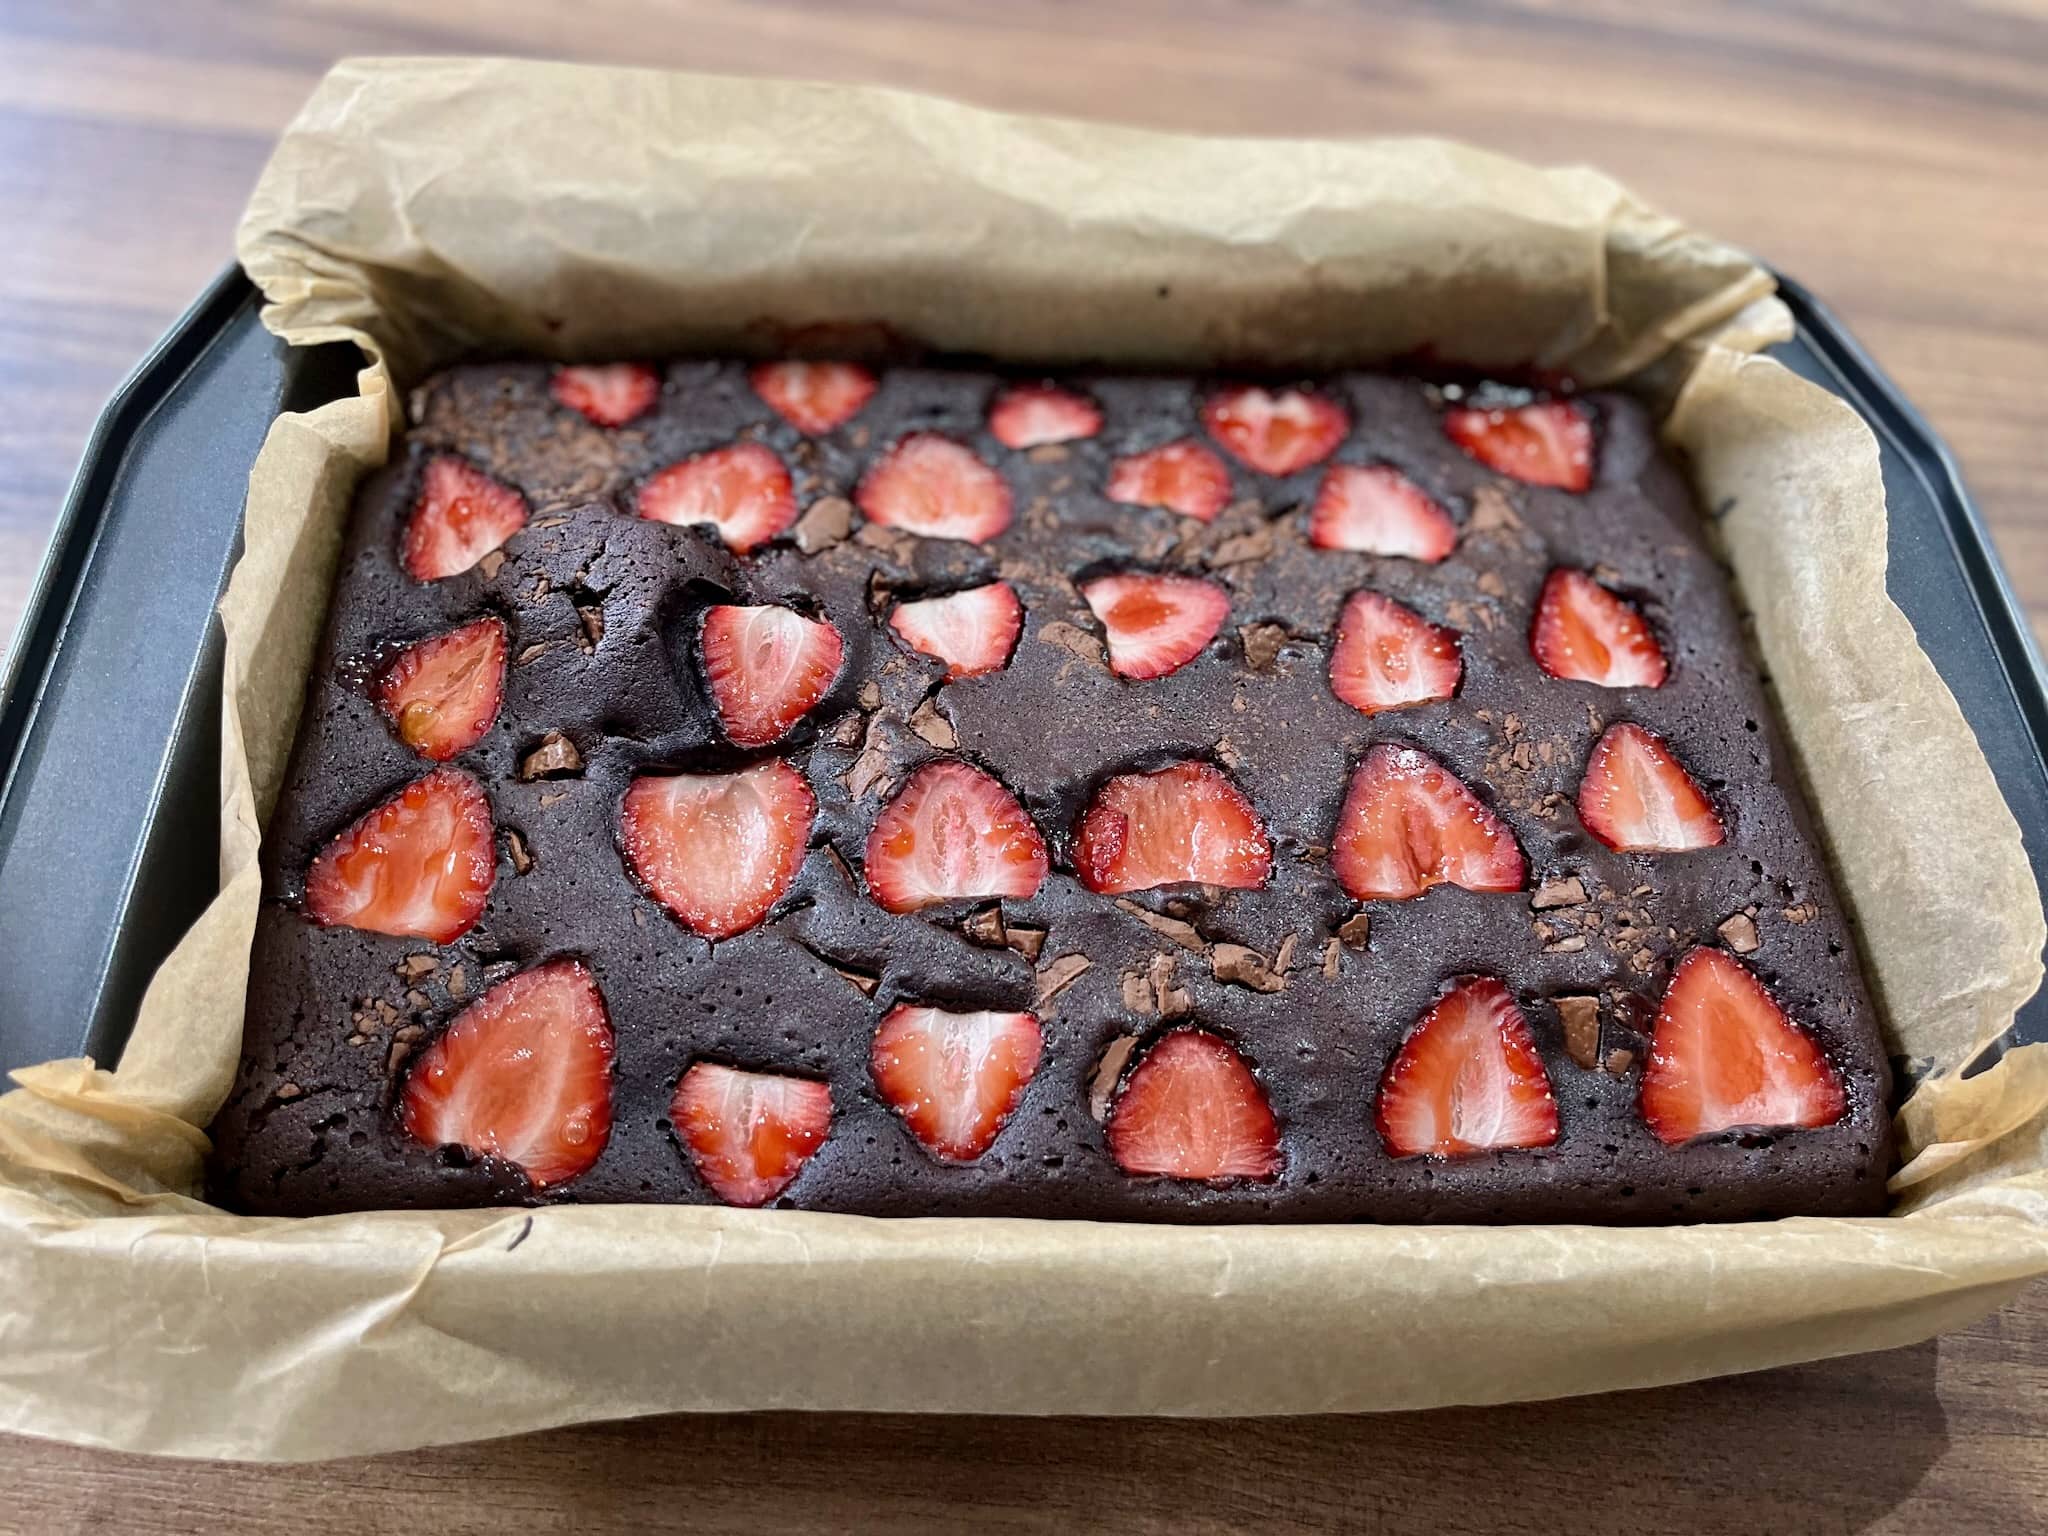 Strawberry Brownie nicely baked, straight from the oven